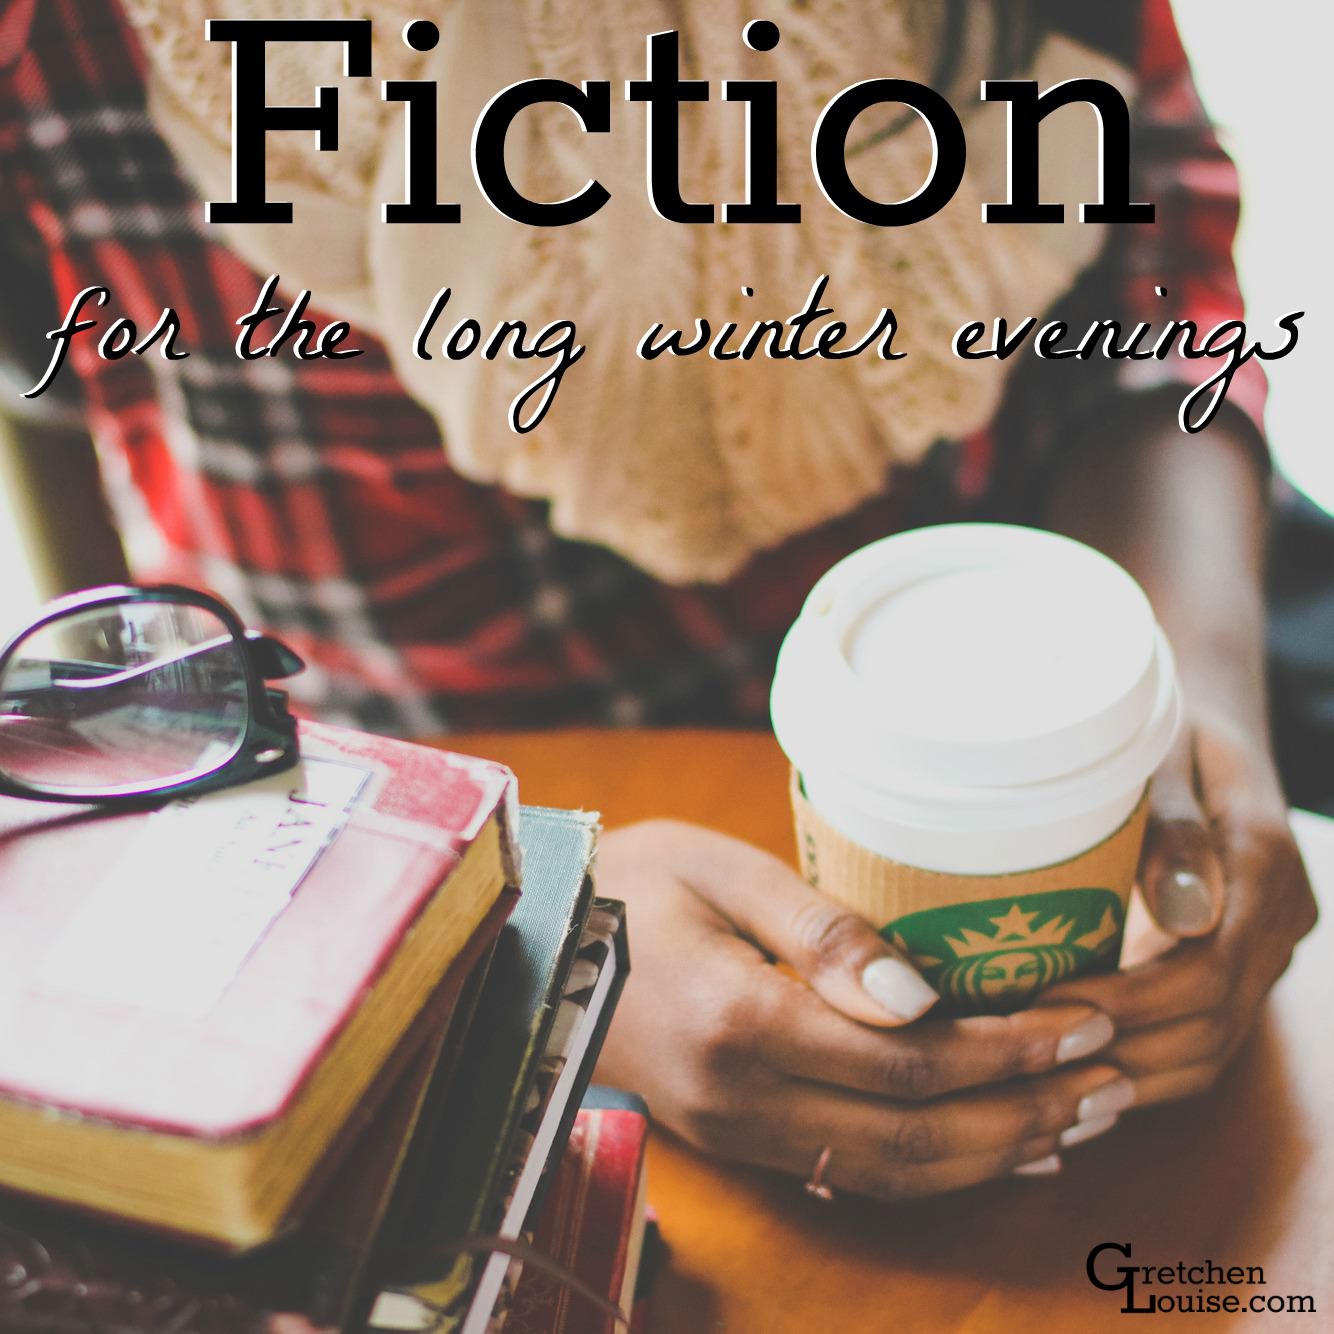 Fiction for the Long Winter Evenings